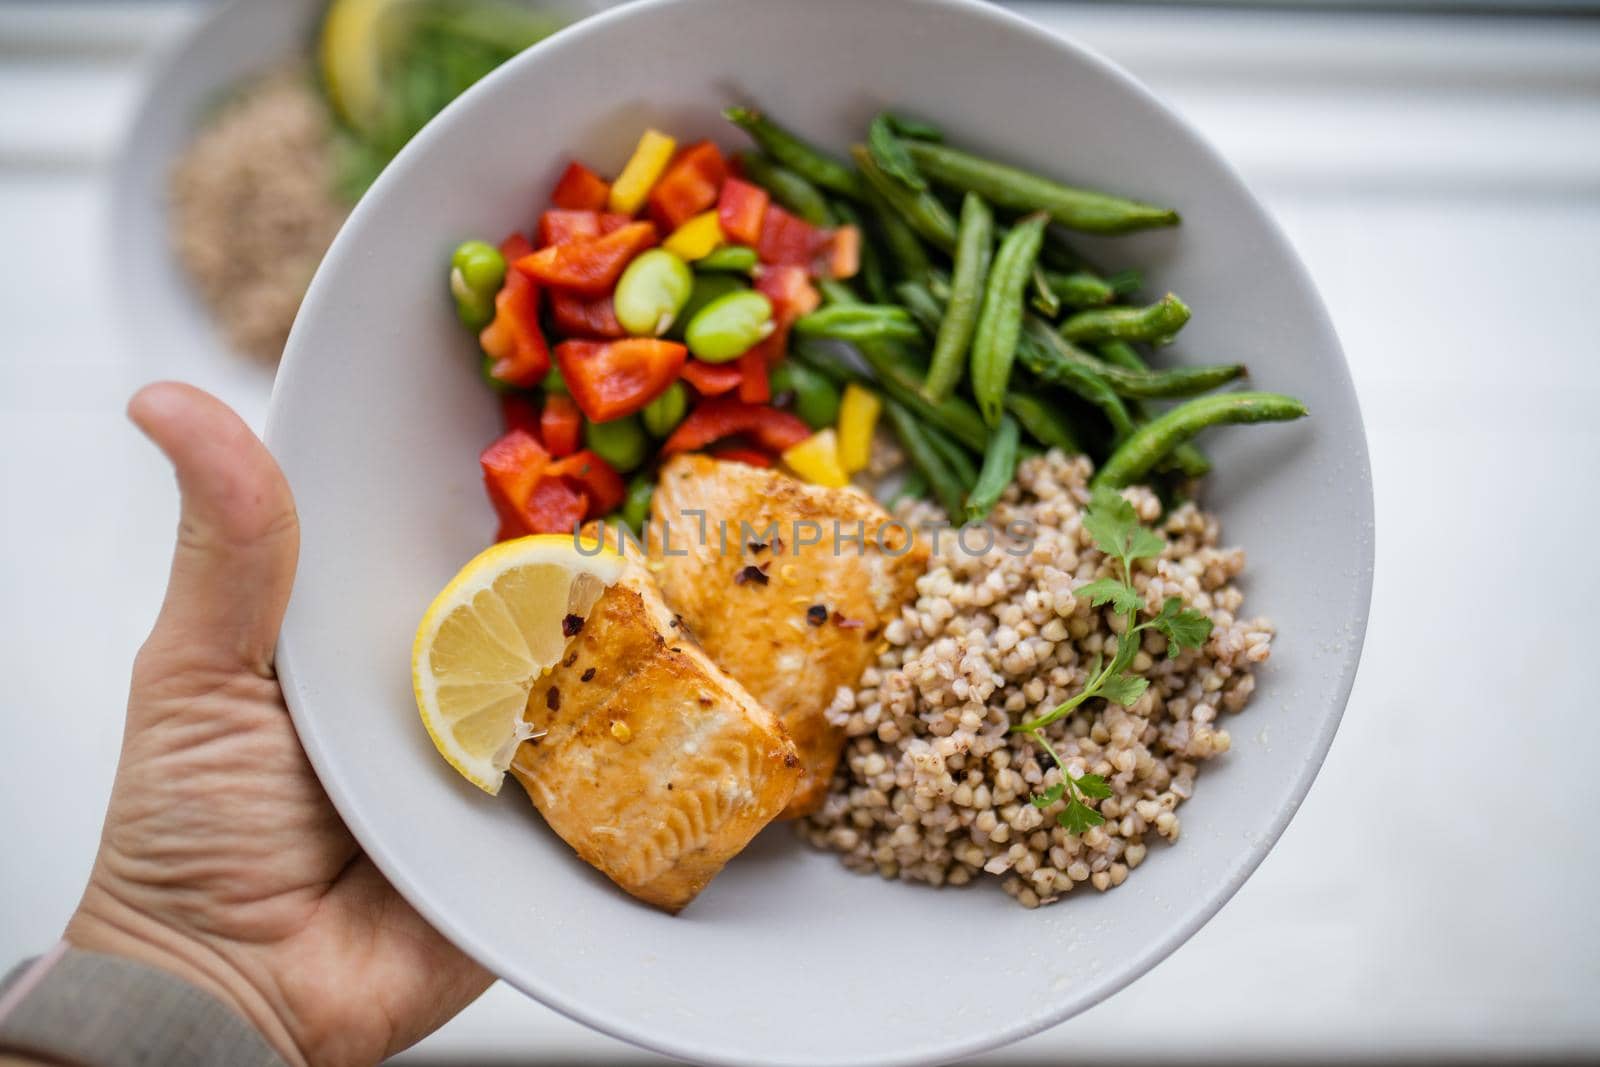 Hand holding salmon and buckwheat dish with green beans, broad beans, and tomato slices. Nutritious dish with vegetables and fish on white plate. Healthy balanced diet